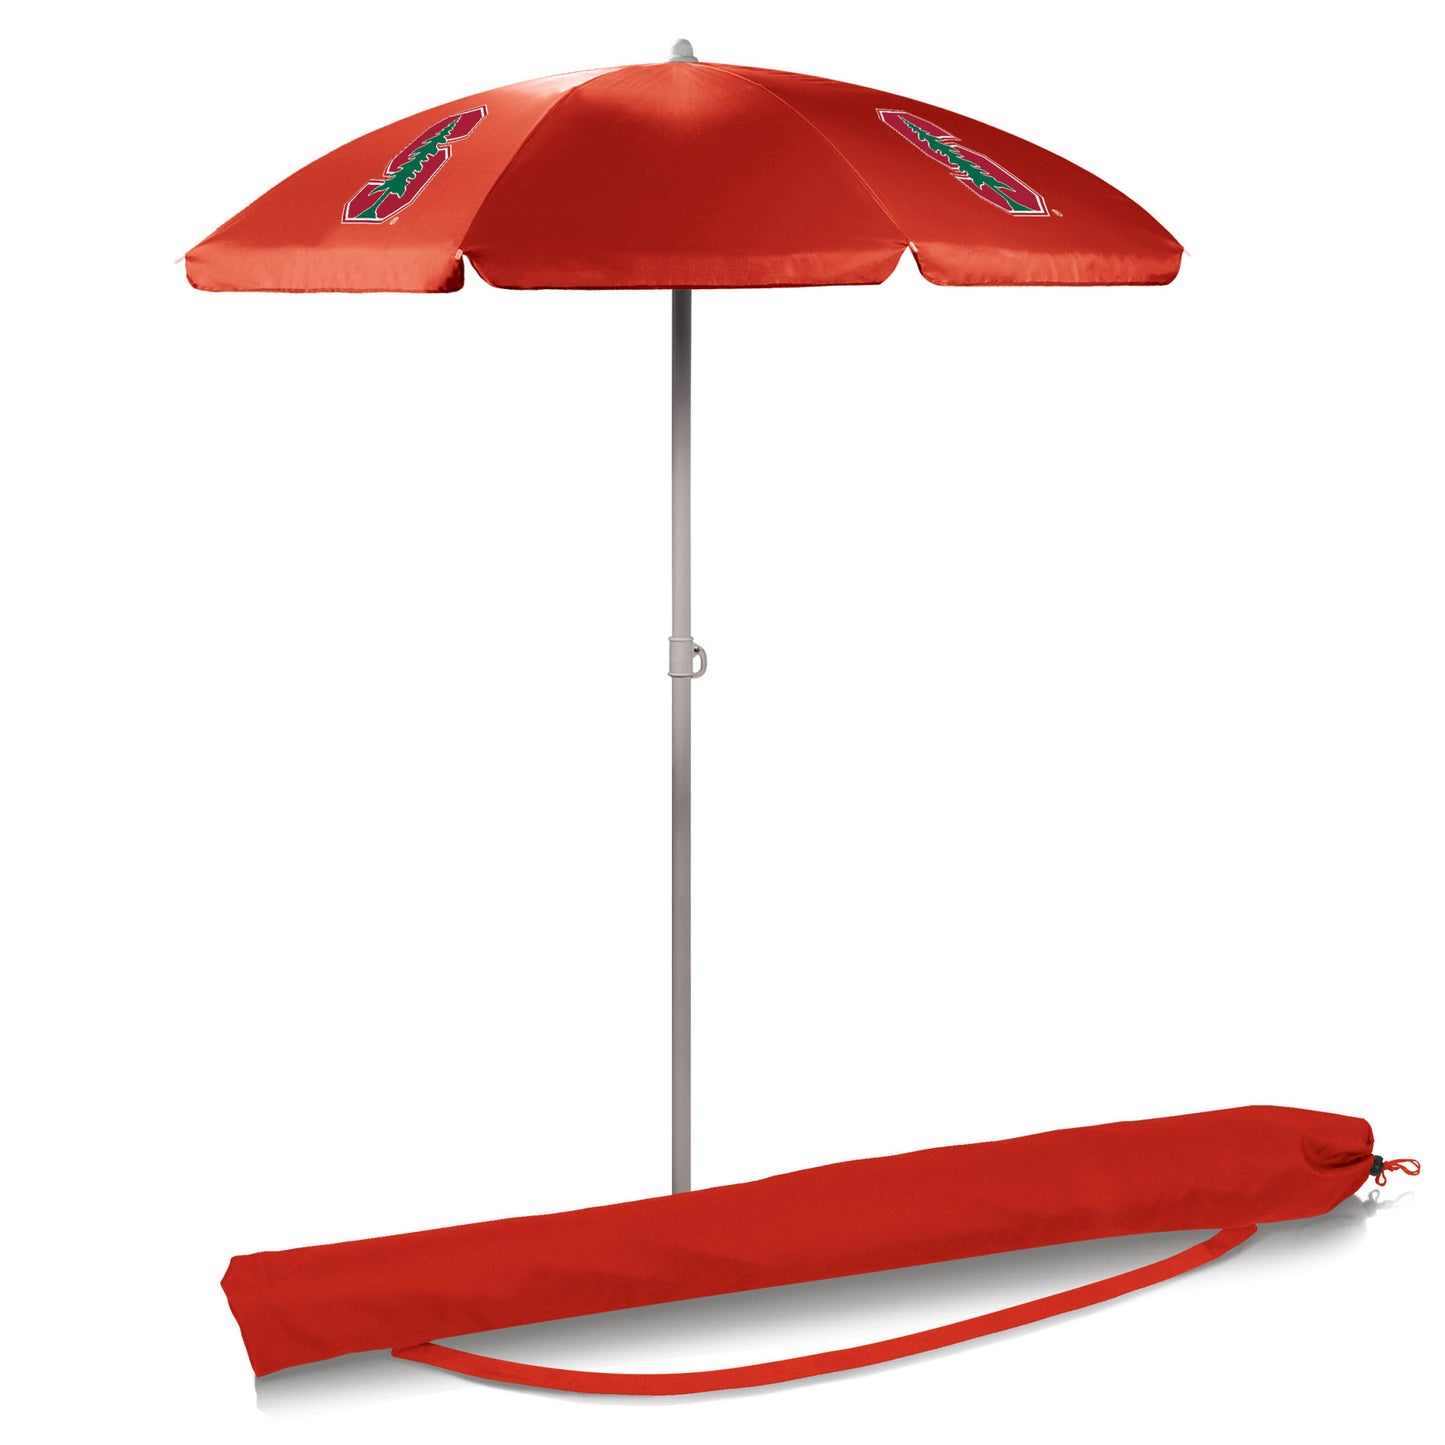 Stanford Cardinal 5.5' Red Portable Beach Umbrella by Picnic Time